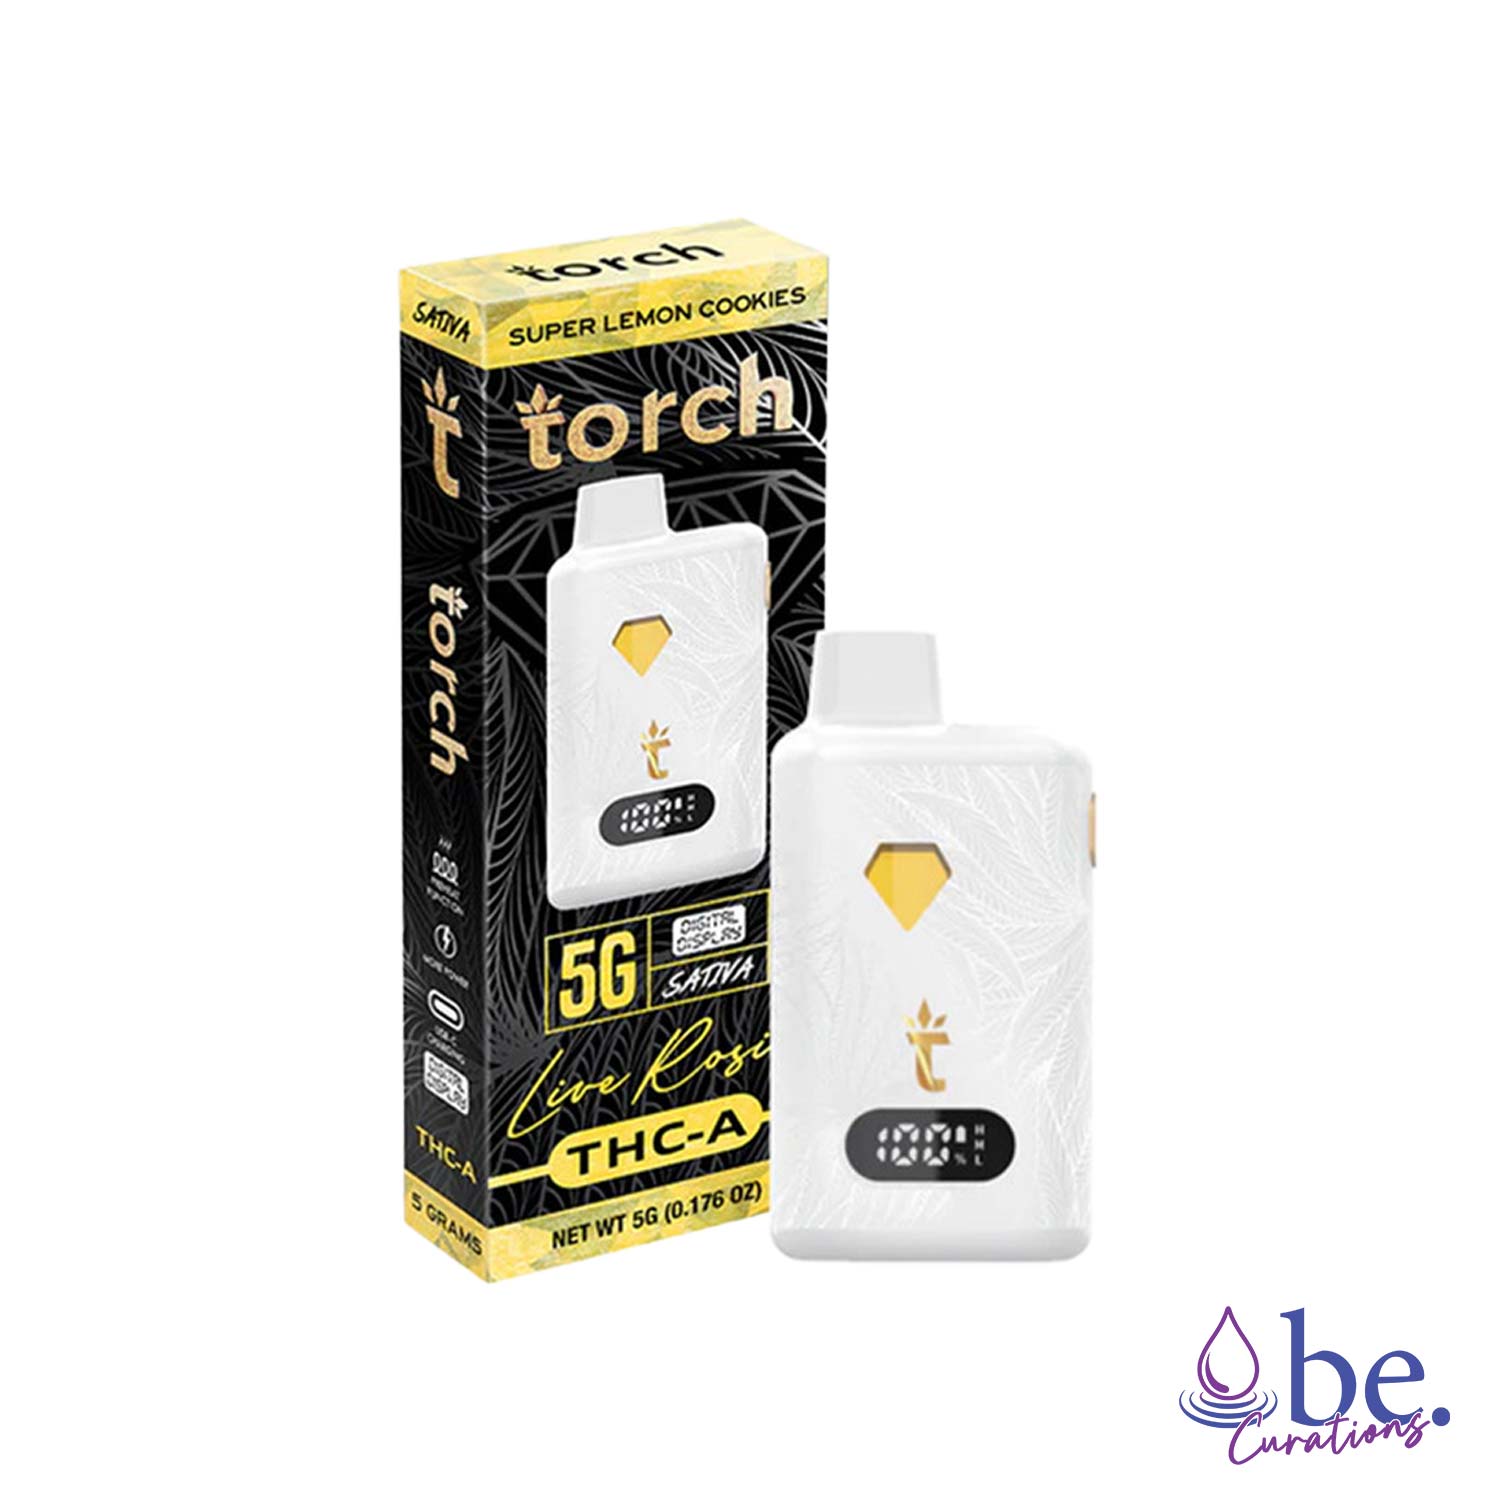 Torch Delta THC-A + Live Rosin Disposable Vape Device 5G - Super Lemon Cookies (Sativa) | Pine flavor with spicy, herbal undertones and a hint of gas.. | be.Curations